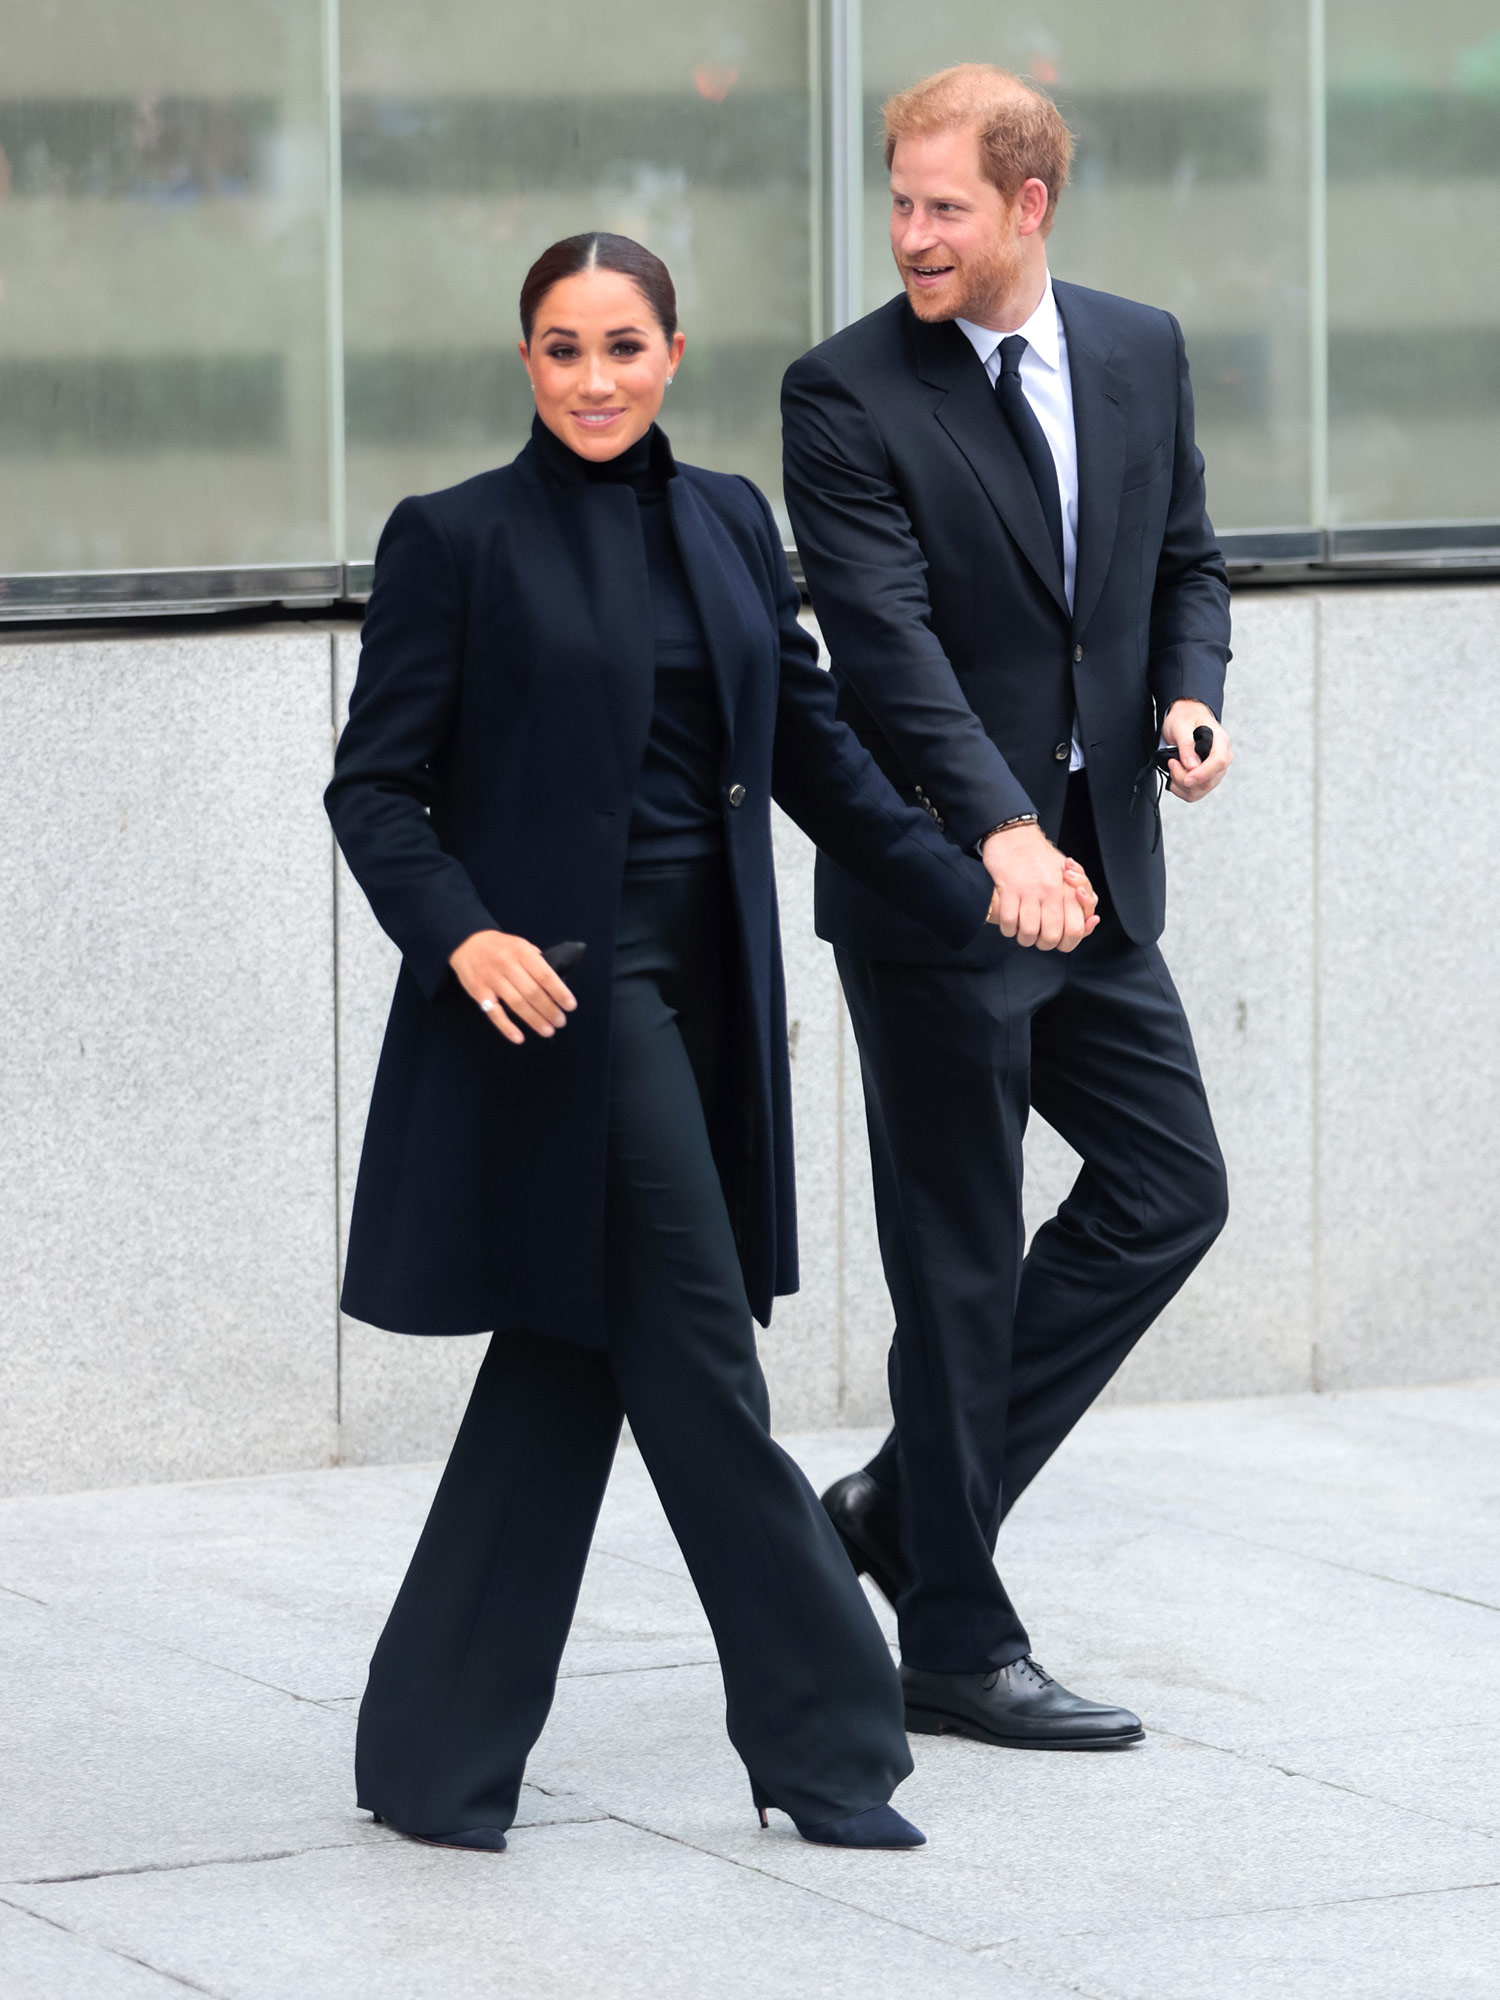 Meghan Markle's Fashion After Leaving Royal Duties, Post-Megxit Style ...